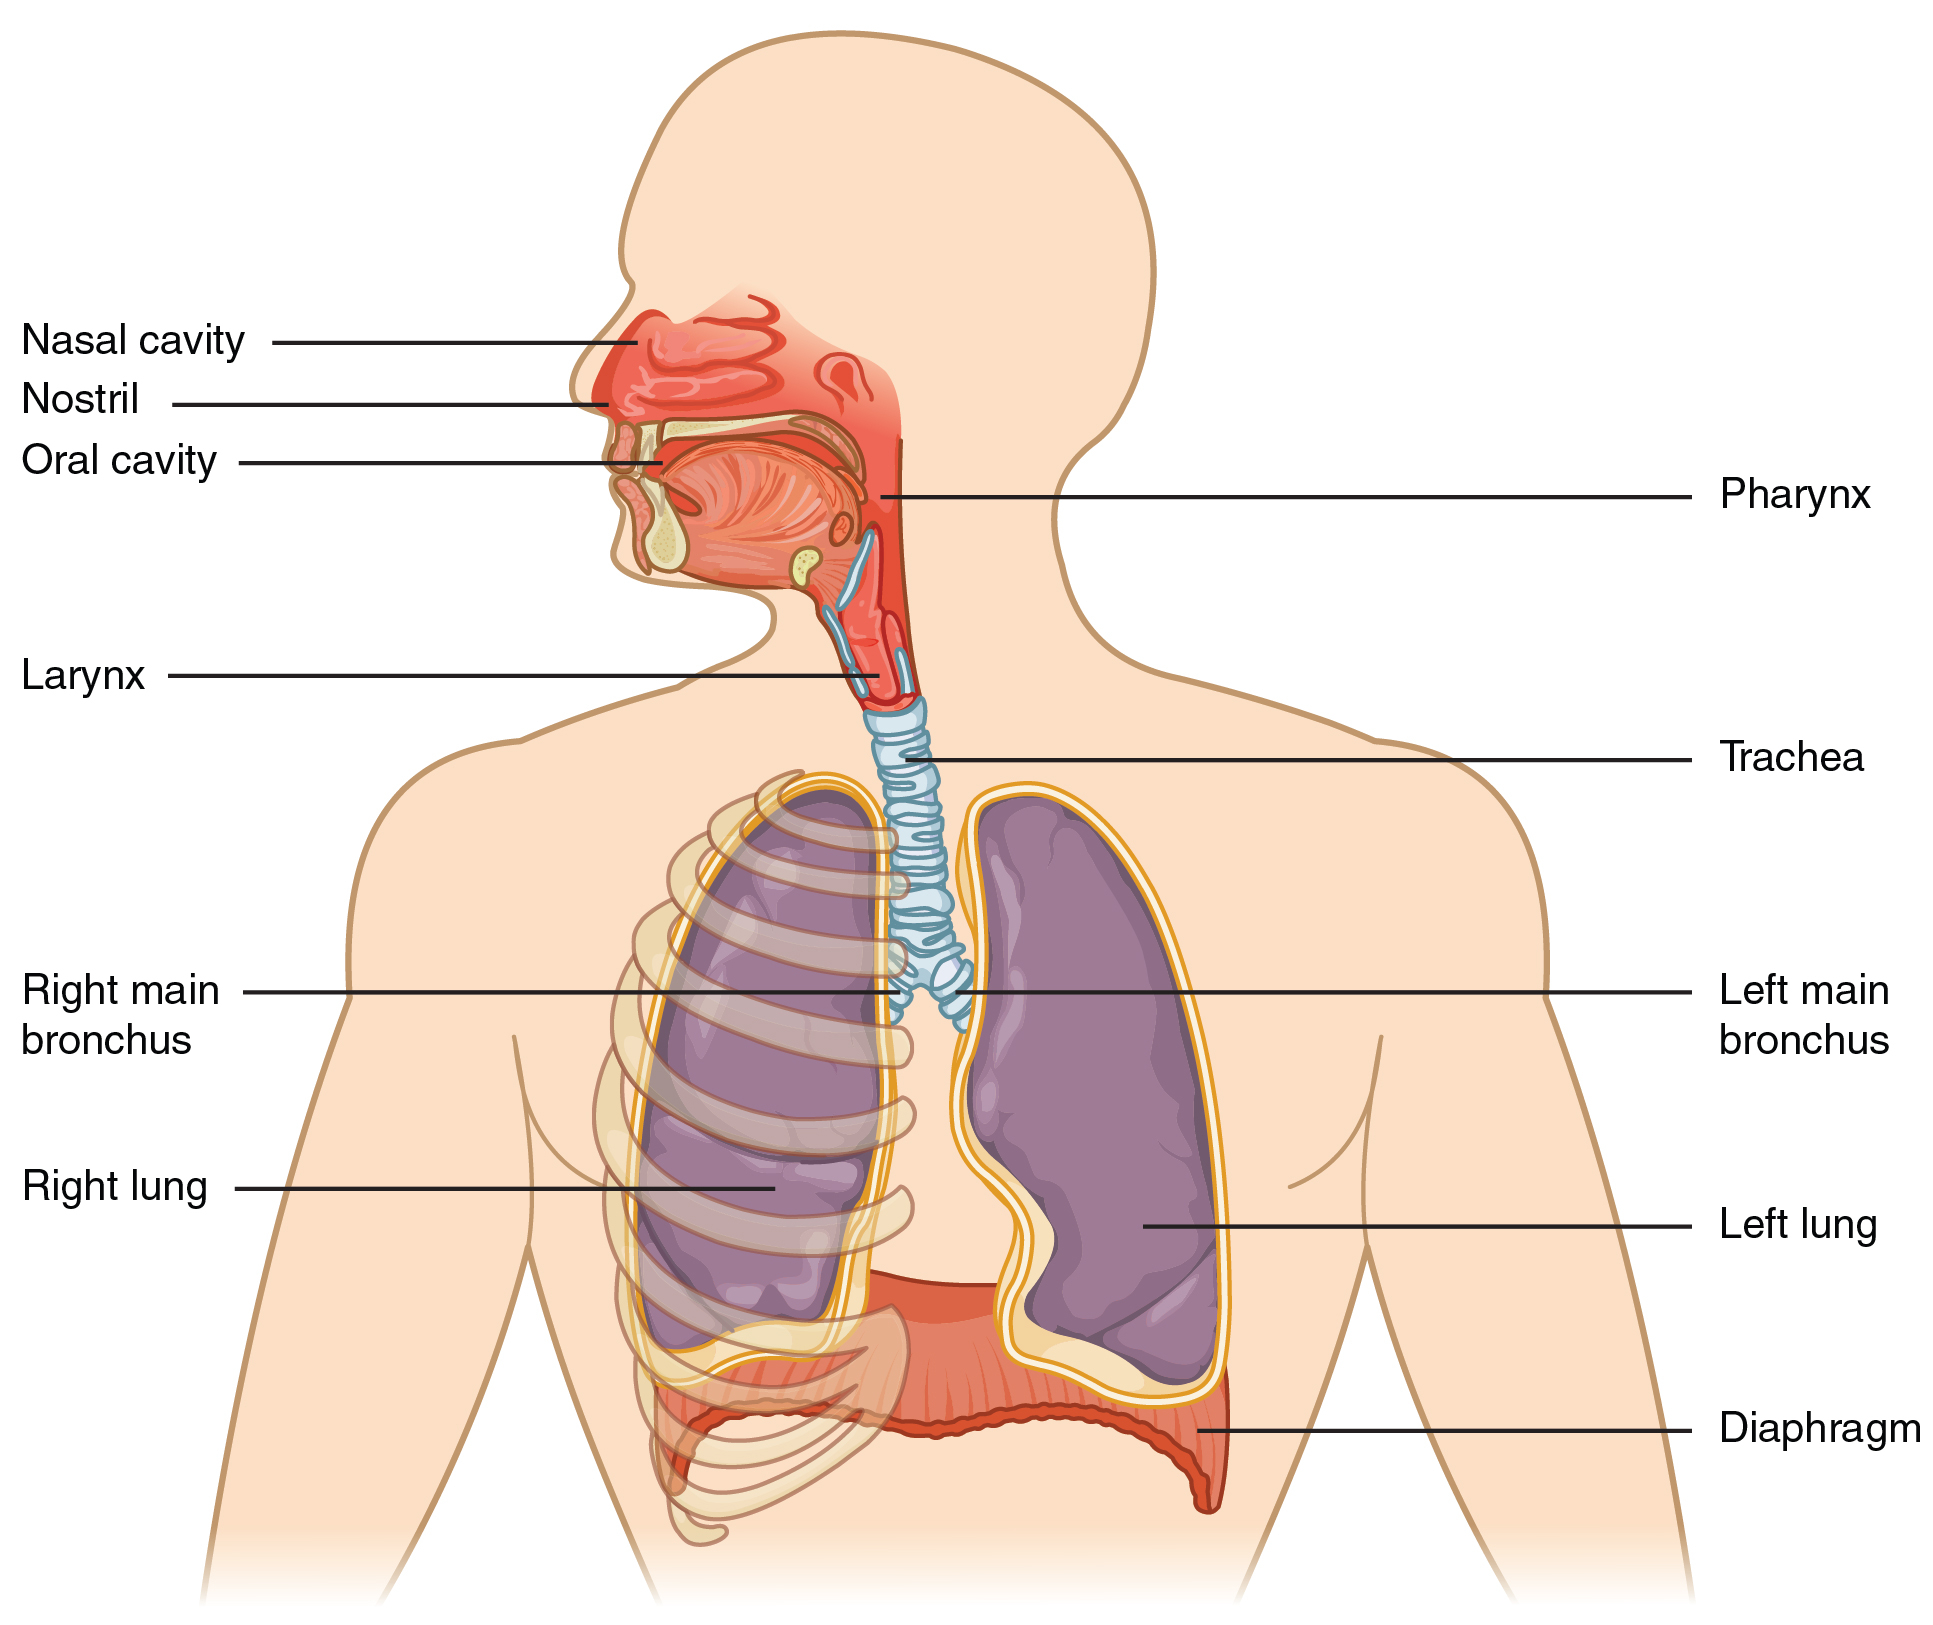 Diagram Of Respiratory System 221 Organs And Structures Of The Respiratory System Anatomy And